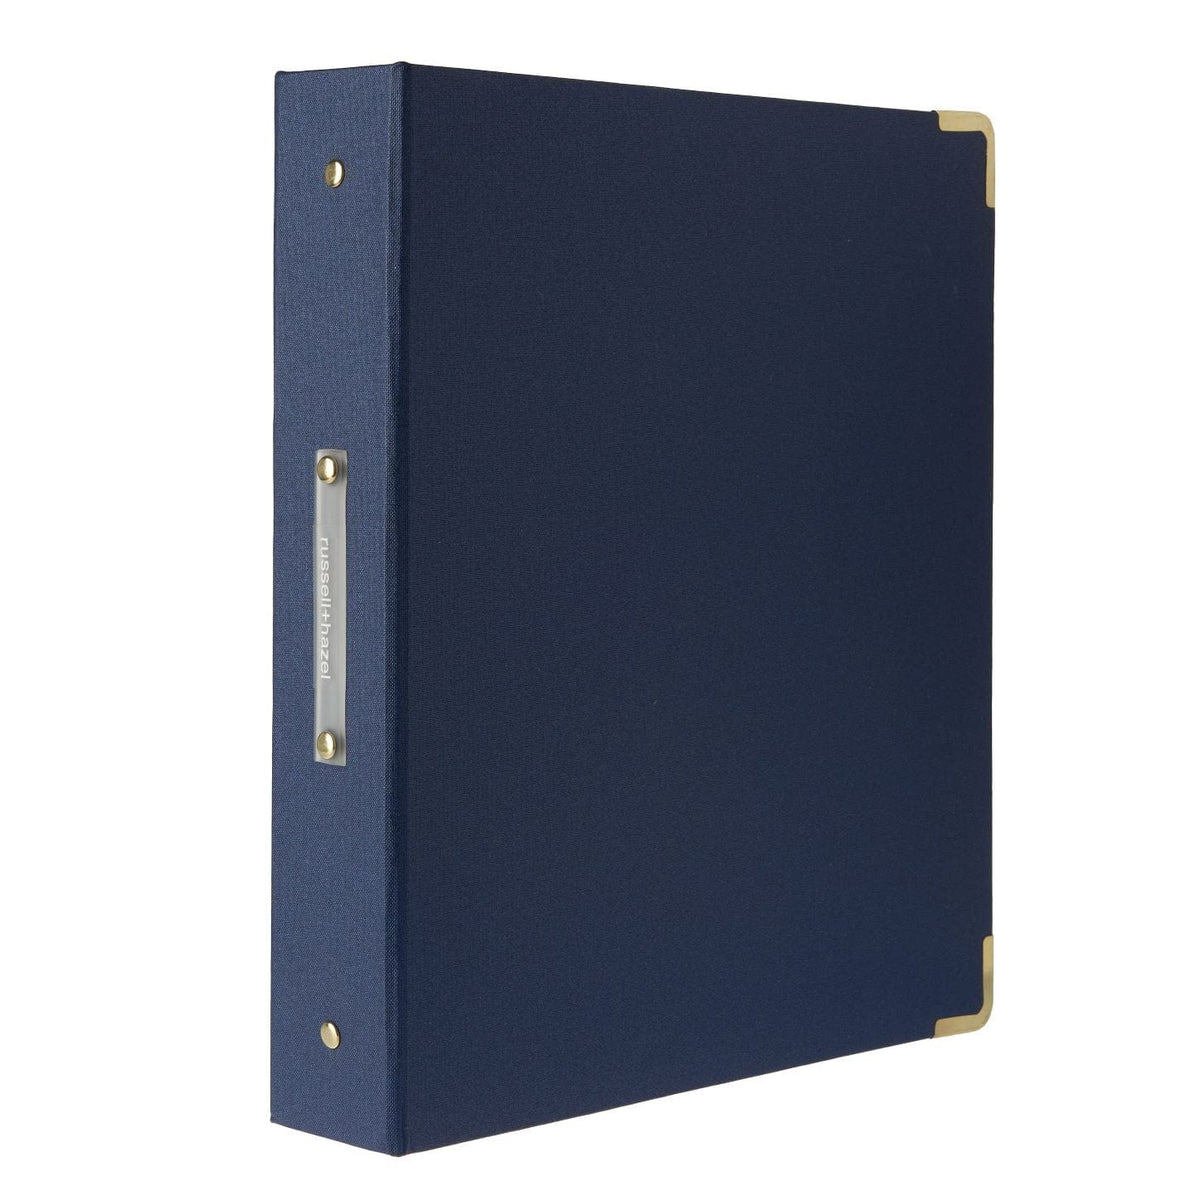 Five-Ring Accompaniment Binder (Navy Blue) [Binder] - Products